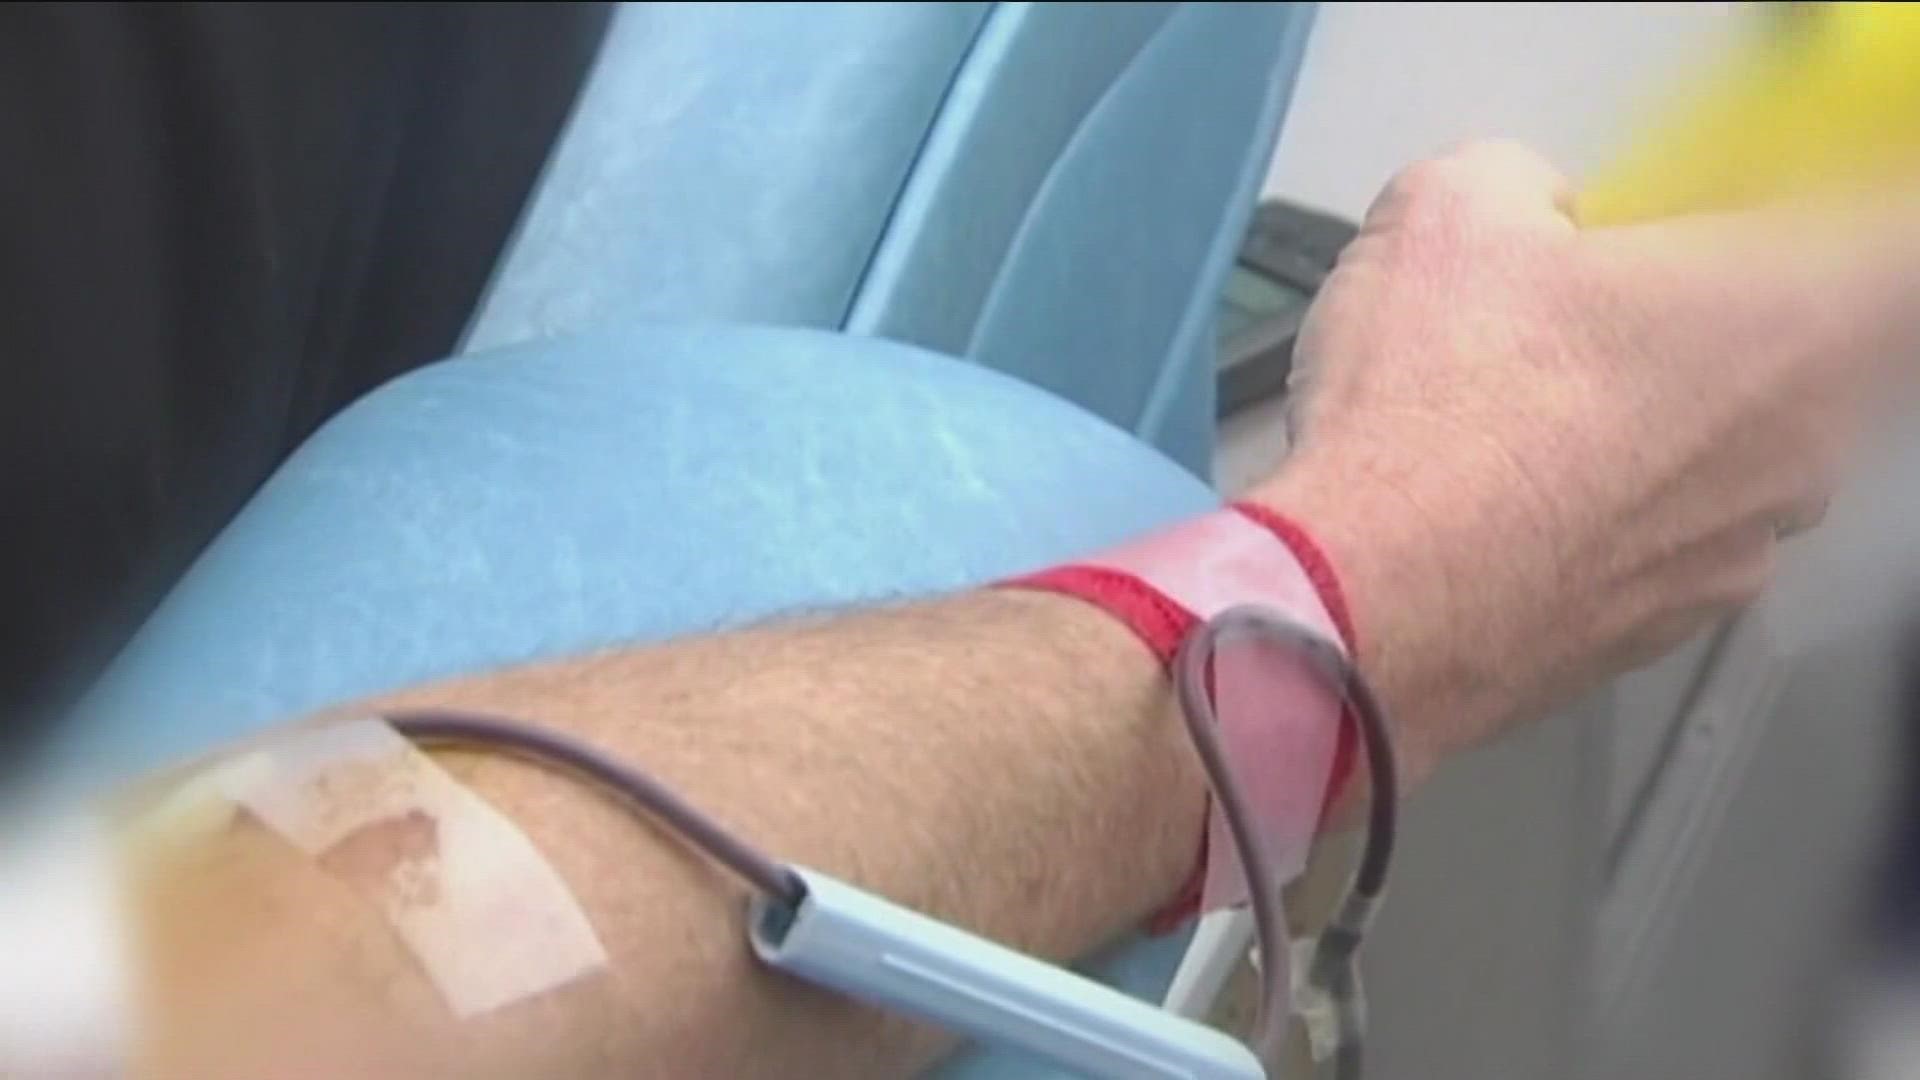 The decision lifted the ban on gay and bisexual men blood donations.